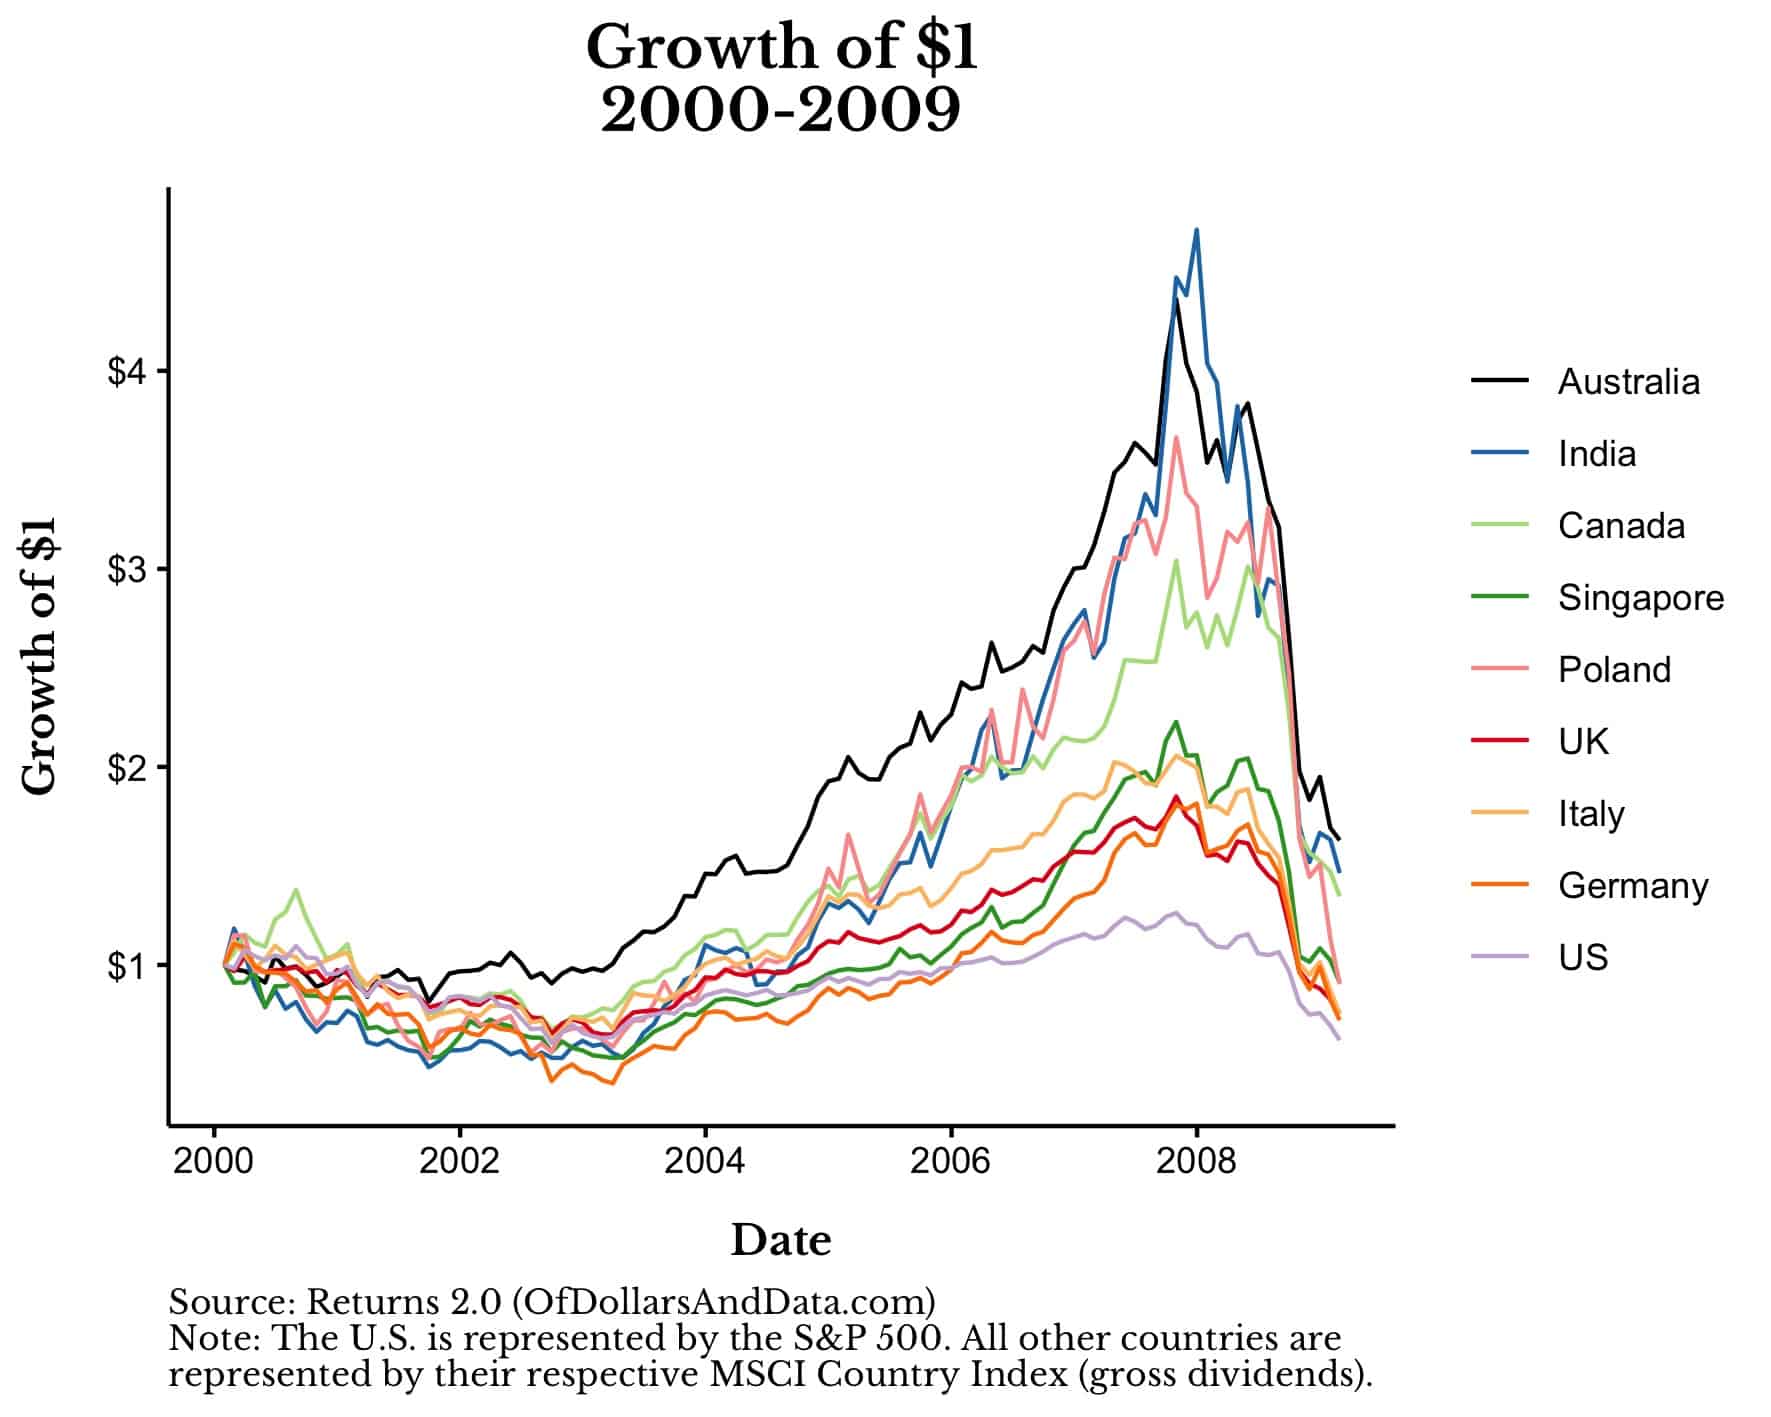 Chart showing growth of $1 from January 2000 to March 2009 for international stocks from 9 different markets around the globe.